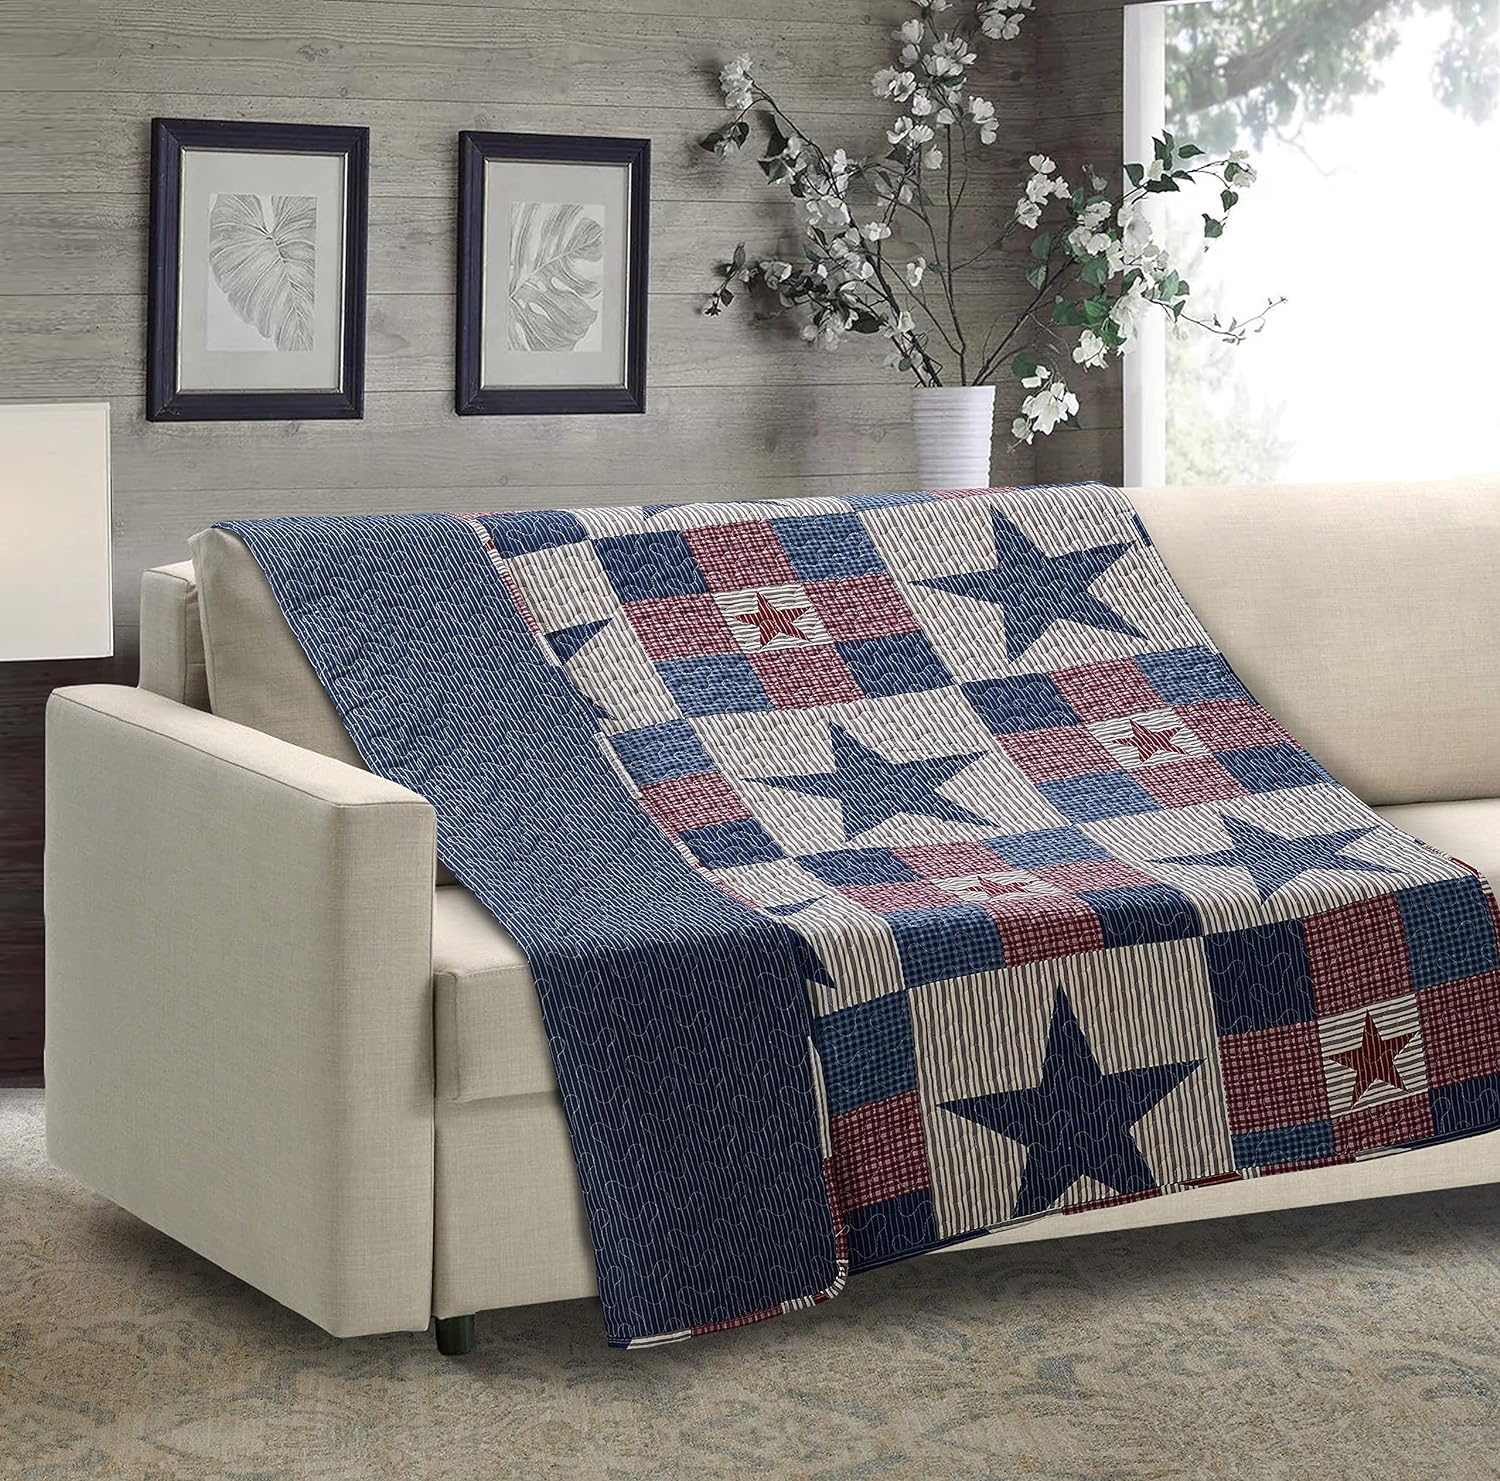 Virah Bella Quilted Throw Blanket 50" x 60" Mountain Cabin Gray Lightweight Throw Quilt Great for Loungers & Extra Bedding - Beautiful Lodge-Themed Blanket